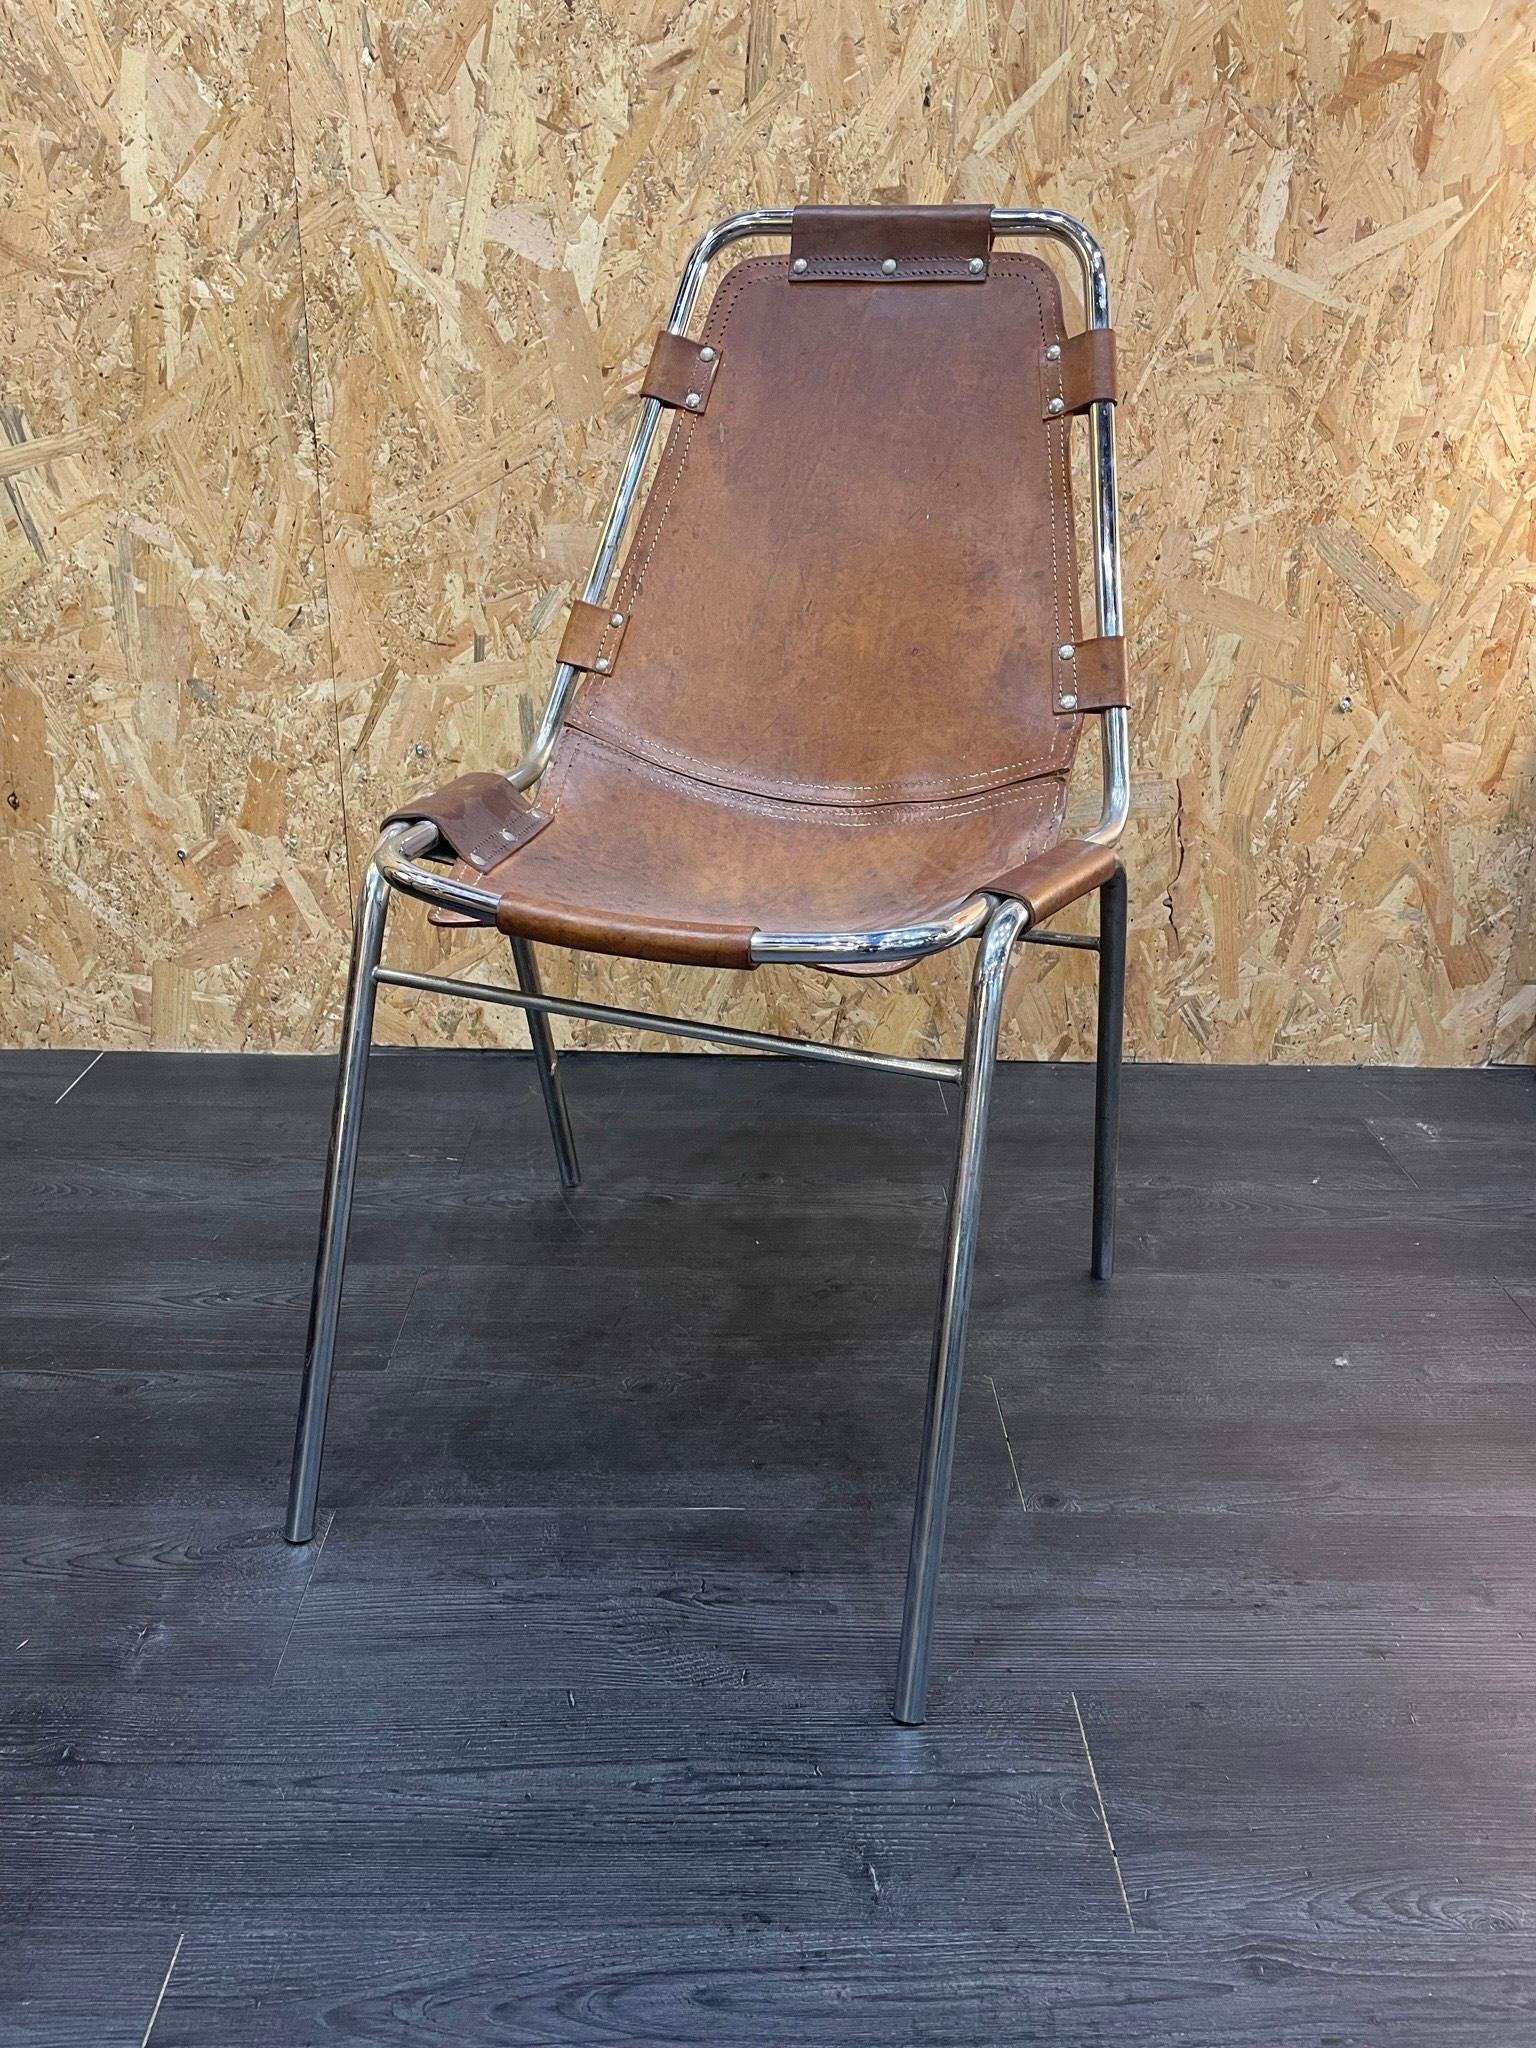 Charlotte Perriand 
6 chairs for the resort of Les Arcs 
Cordoba leather suspended on a chromed tubular metal frame.
Circa 1960
W 46 x D 55 x H 81 cms
Beautiful period condition
Emblematic model of the resort designed by the famous architect 
5400